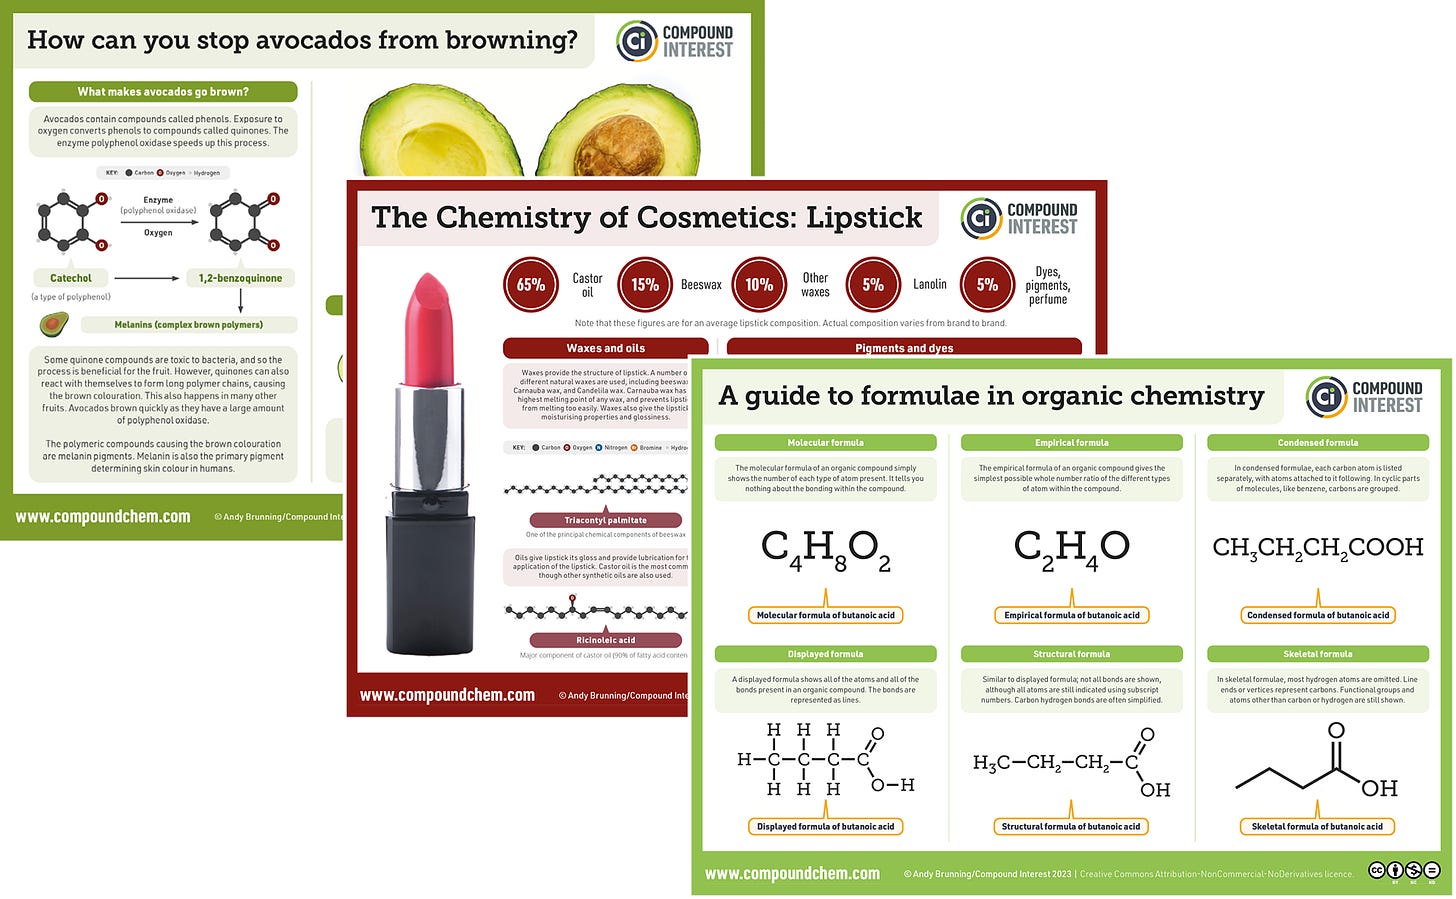 Image of several of my chemistry infographics stacked on top of each other: one on avocados, one on lipstick, and one on organic formulae.